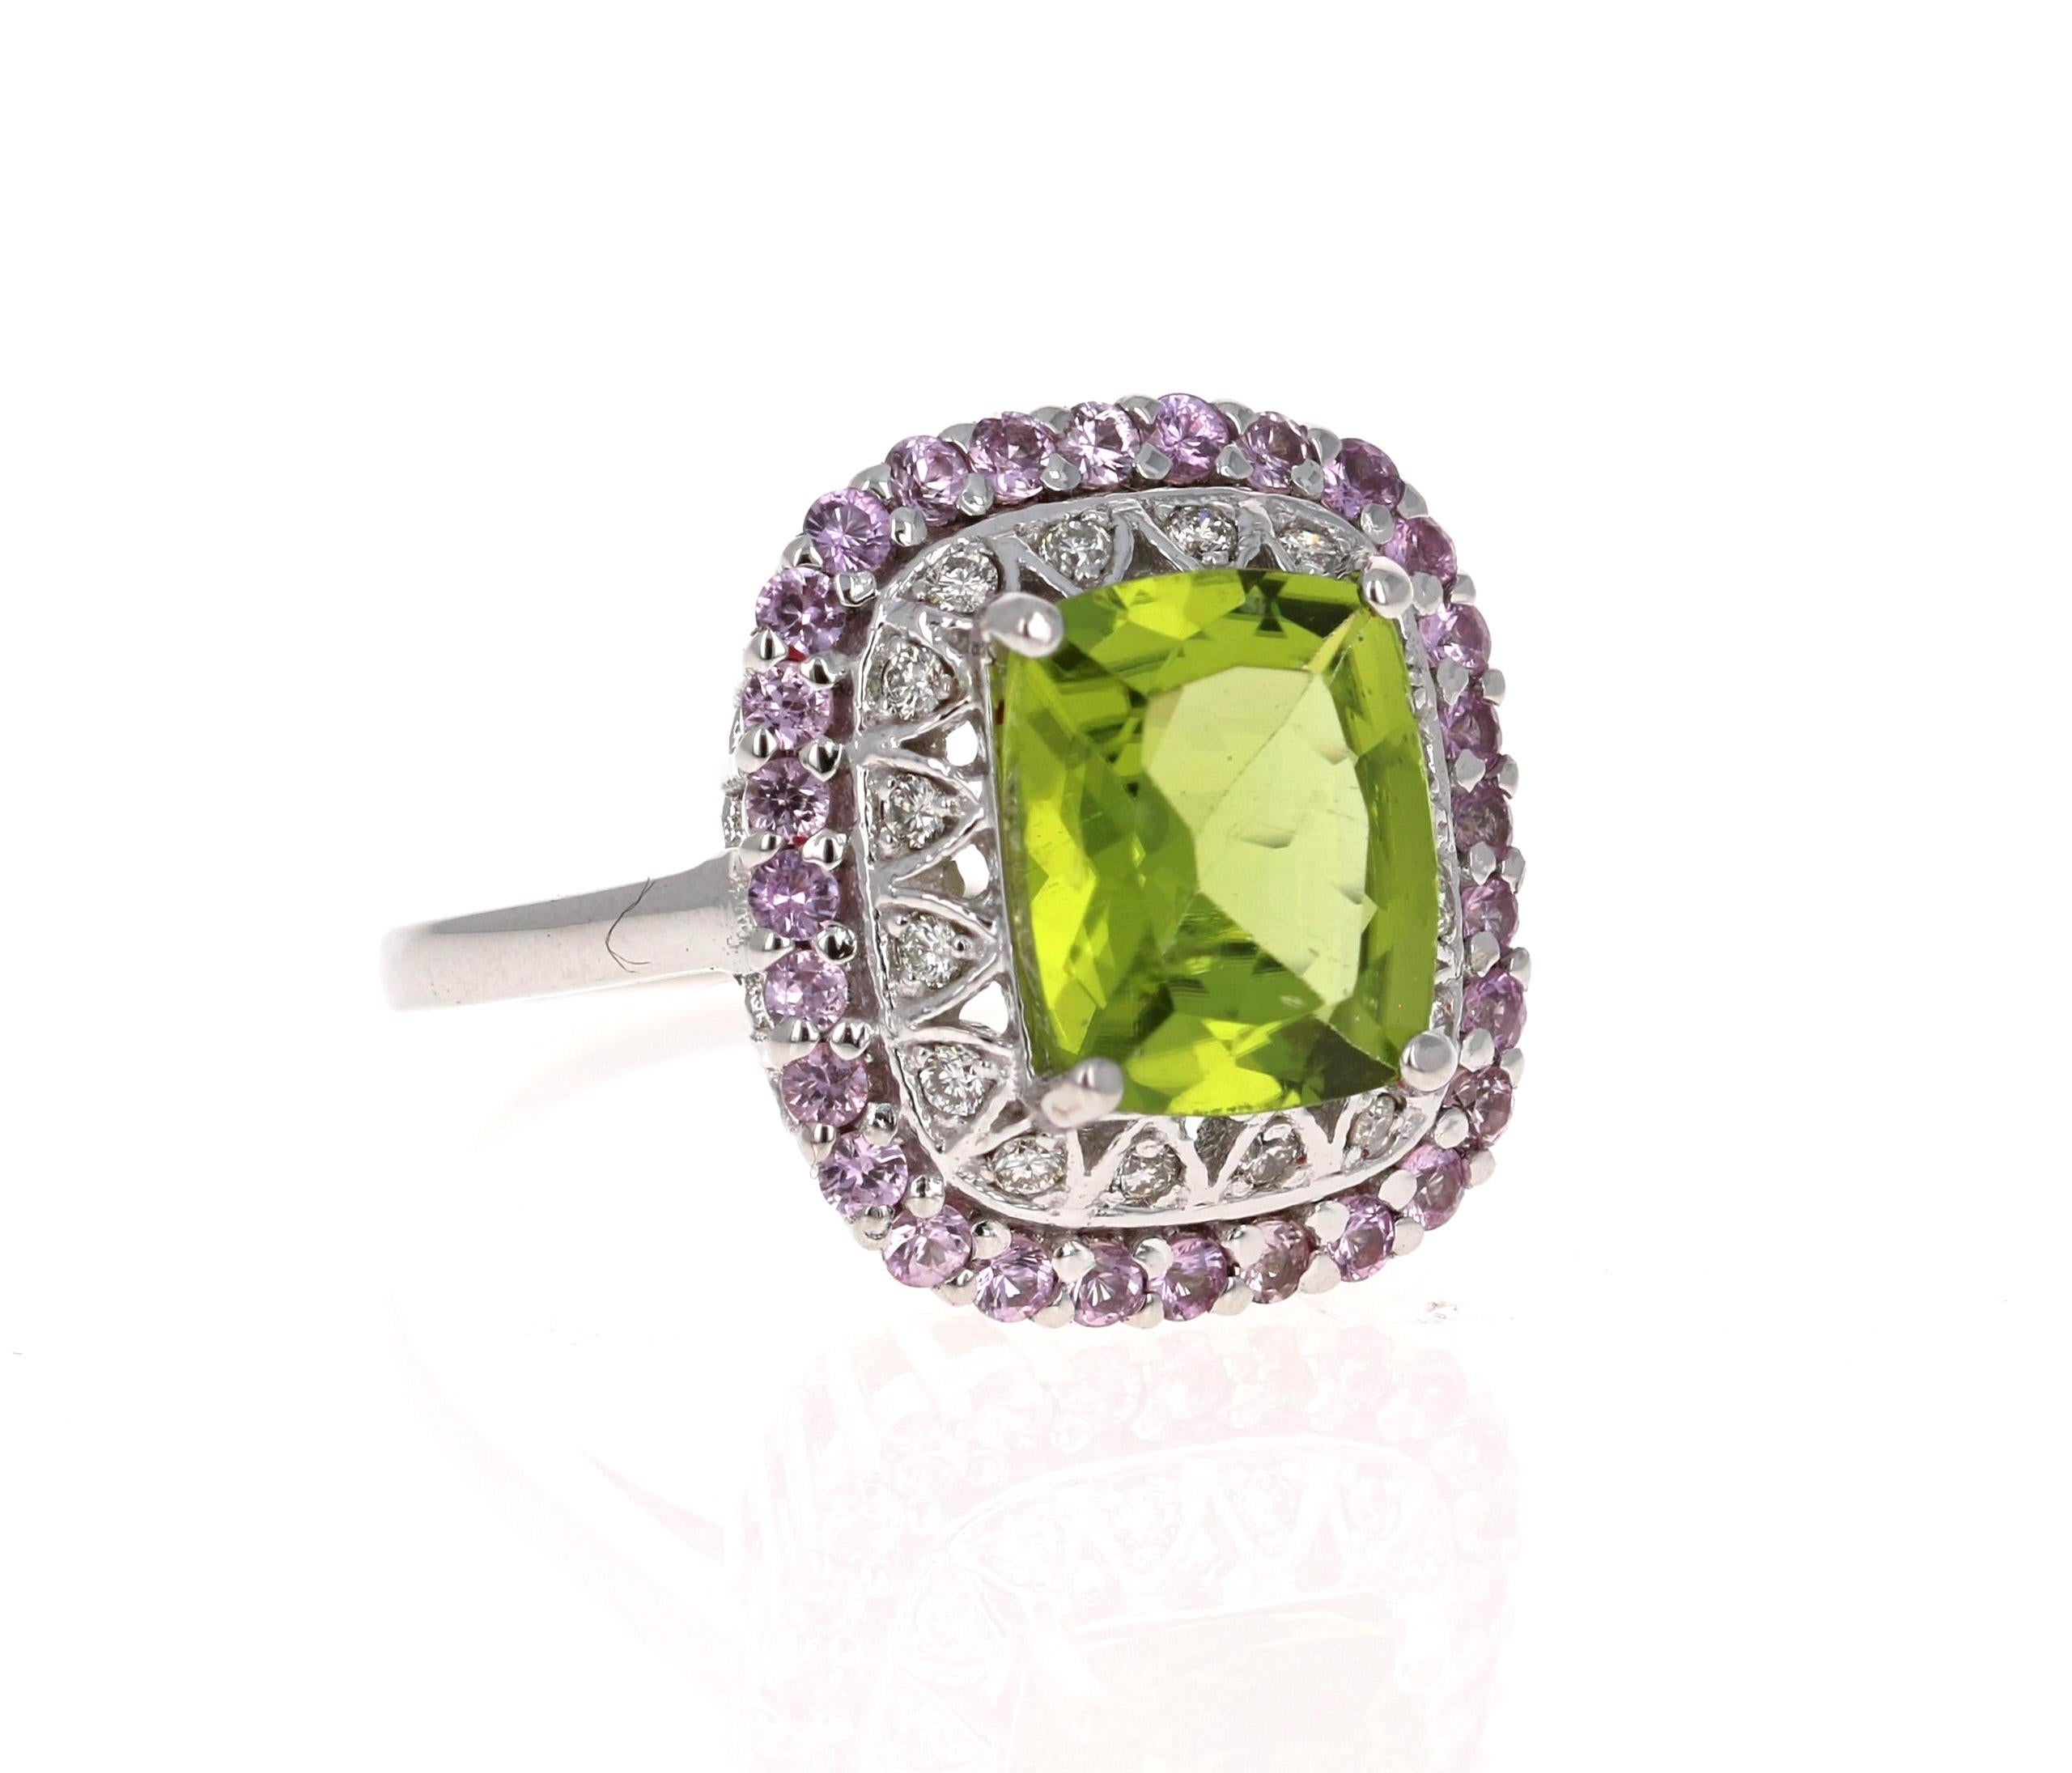 4.18 Carat Cushion Cut Peridot Sapphire and Diamond 14 Karat White Gold Ring

This beautiful ring has an Cushion Cut Peridot that weighs 3.38 Carats. The ring is surrounded by 28 Light Pink Sapphires that weigh 0.63 Carats and 16 Round Cut Diamonds